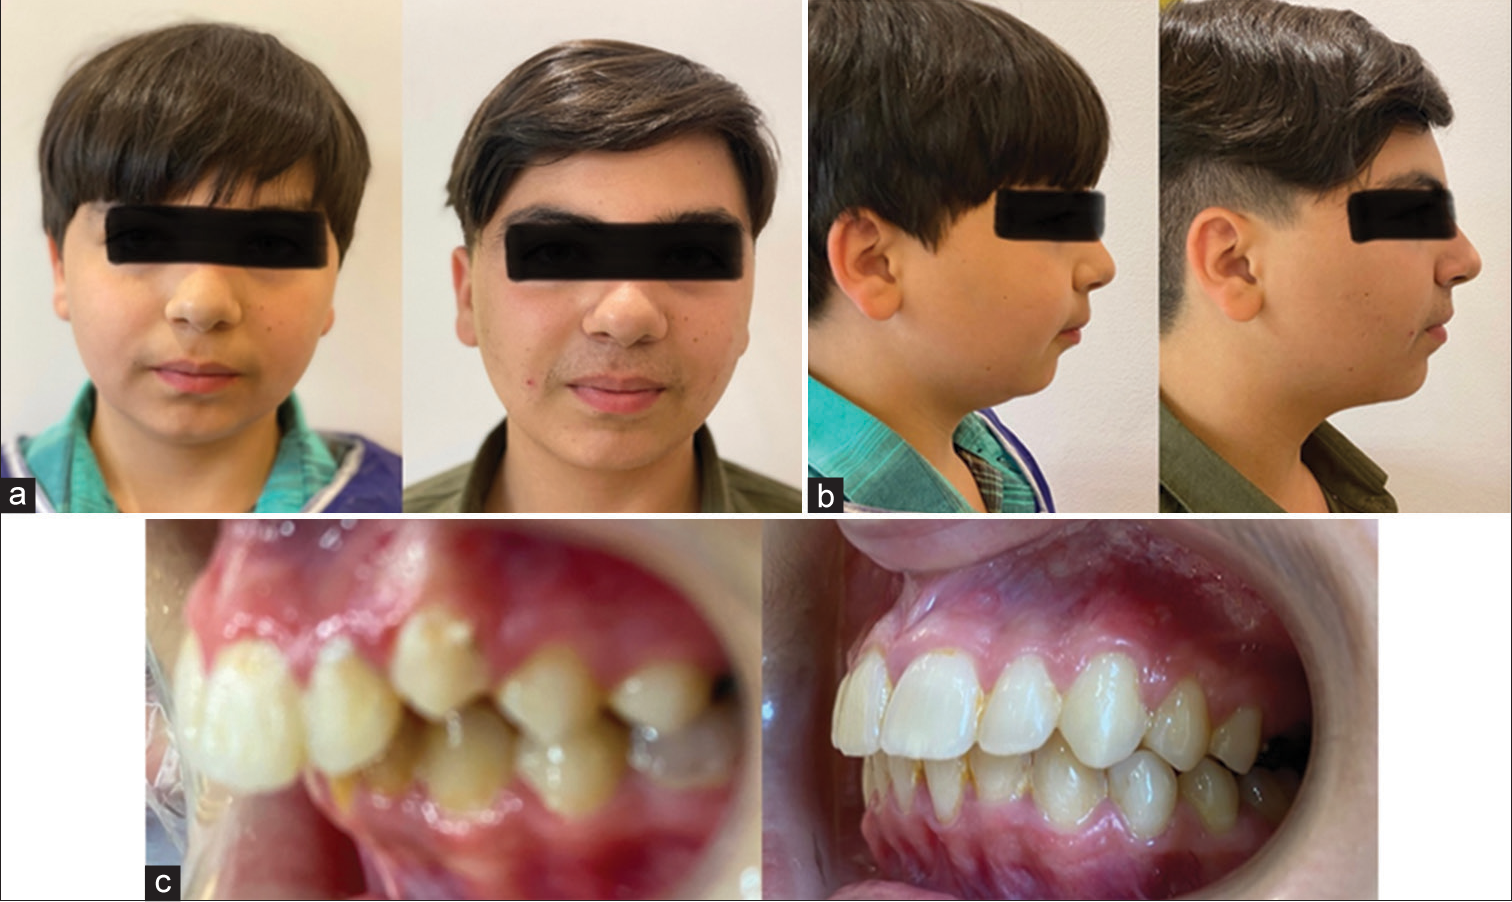 Pre- and post-treatment photographs: (a) frontal view, (b) profile view, and (c) lateral view intraoral.